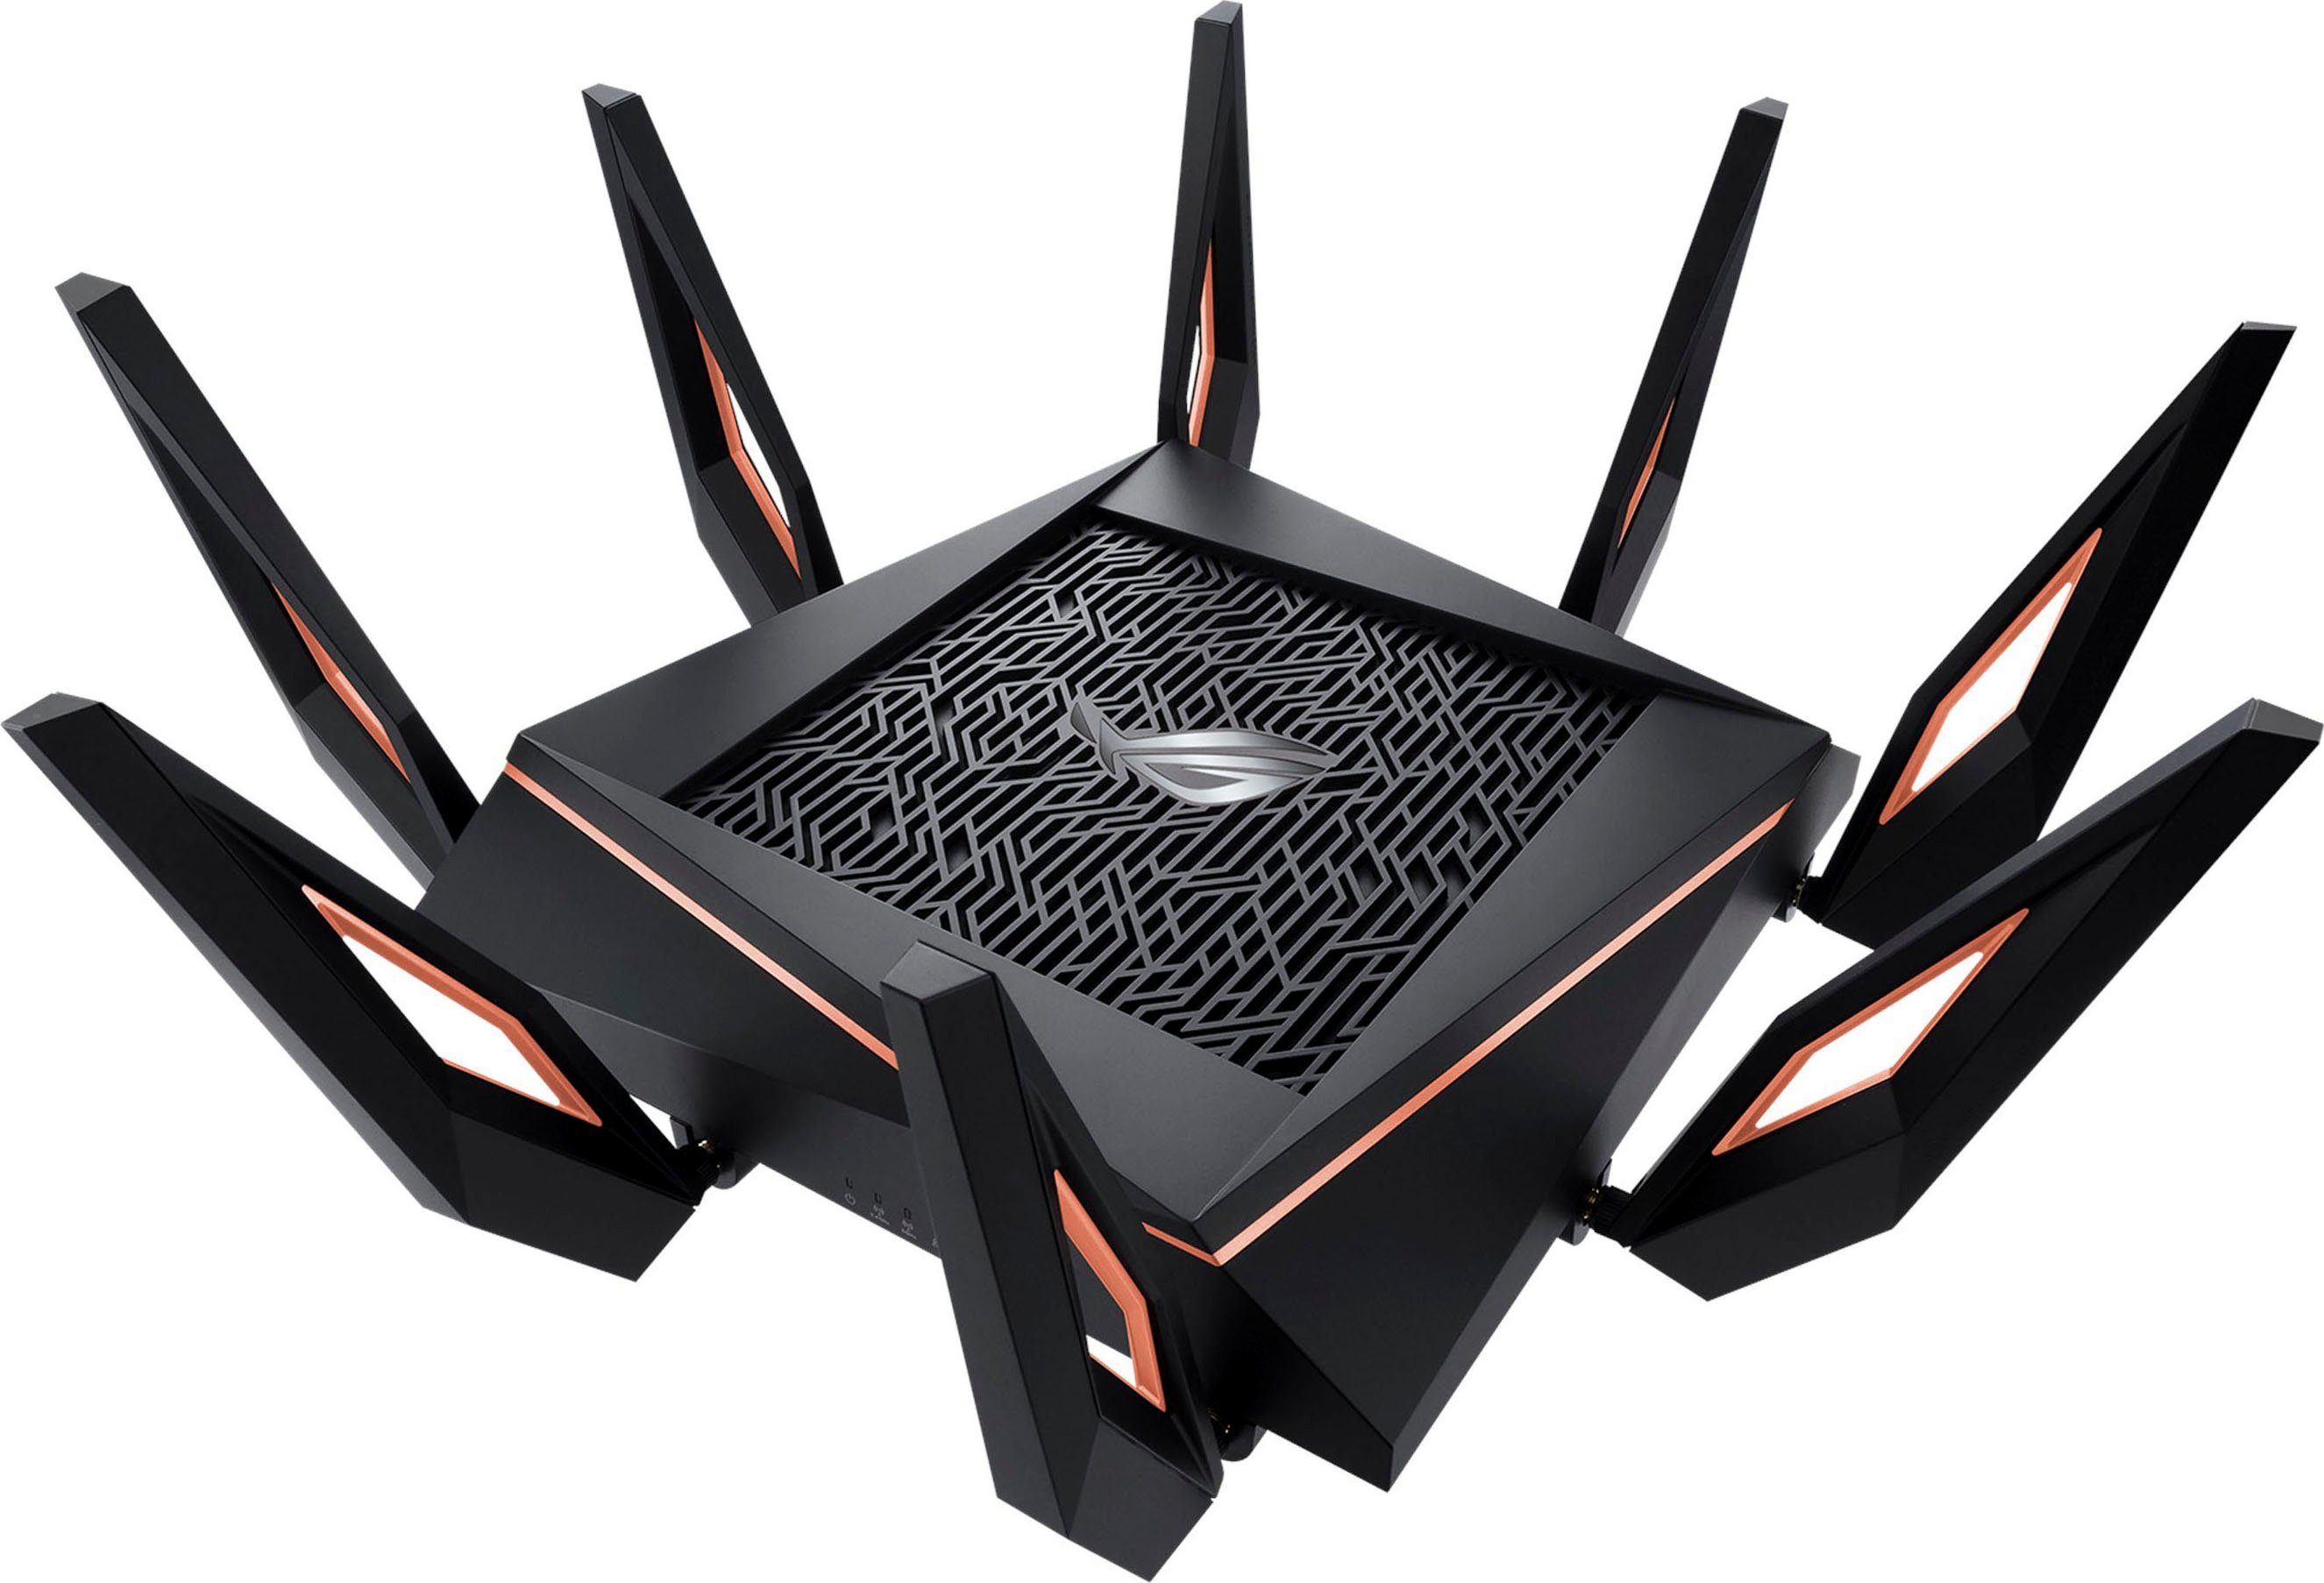 Asus Rapture GT-AX11000 WLAN-Router